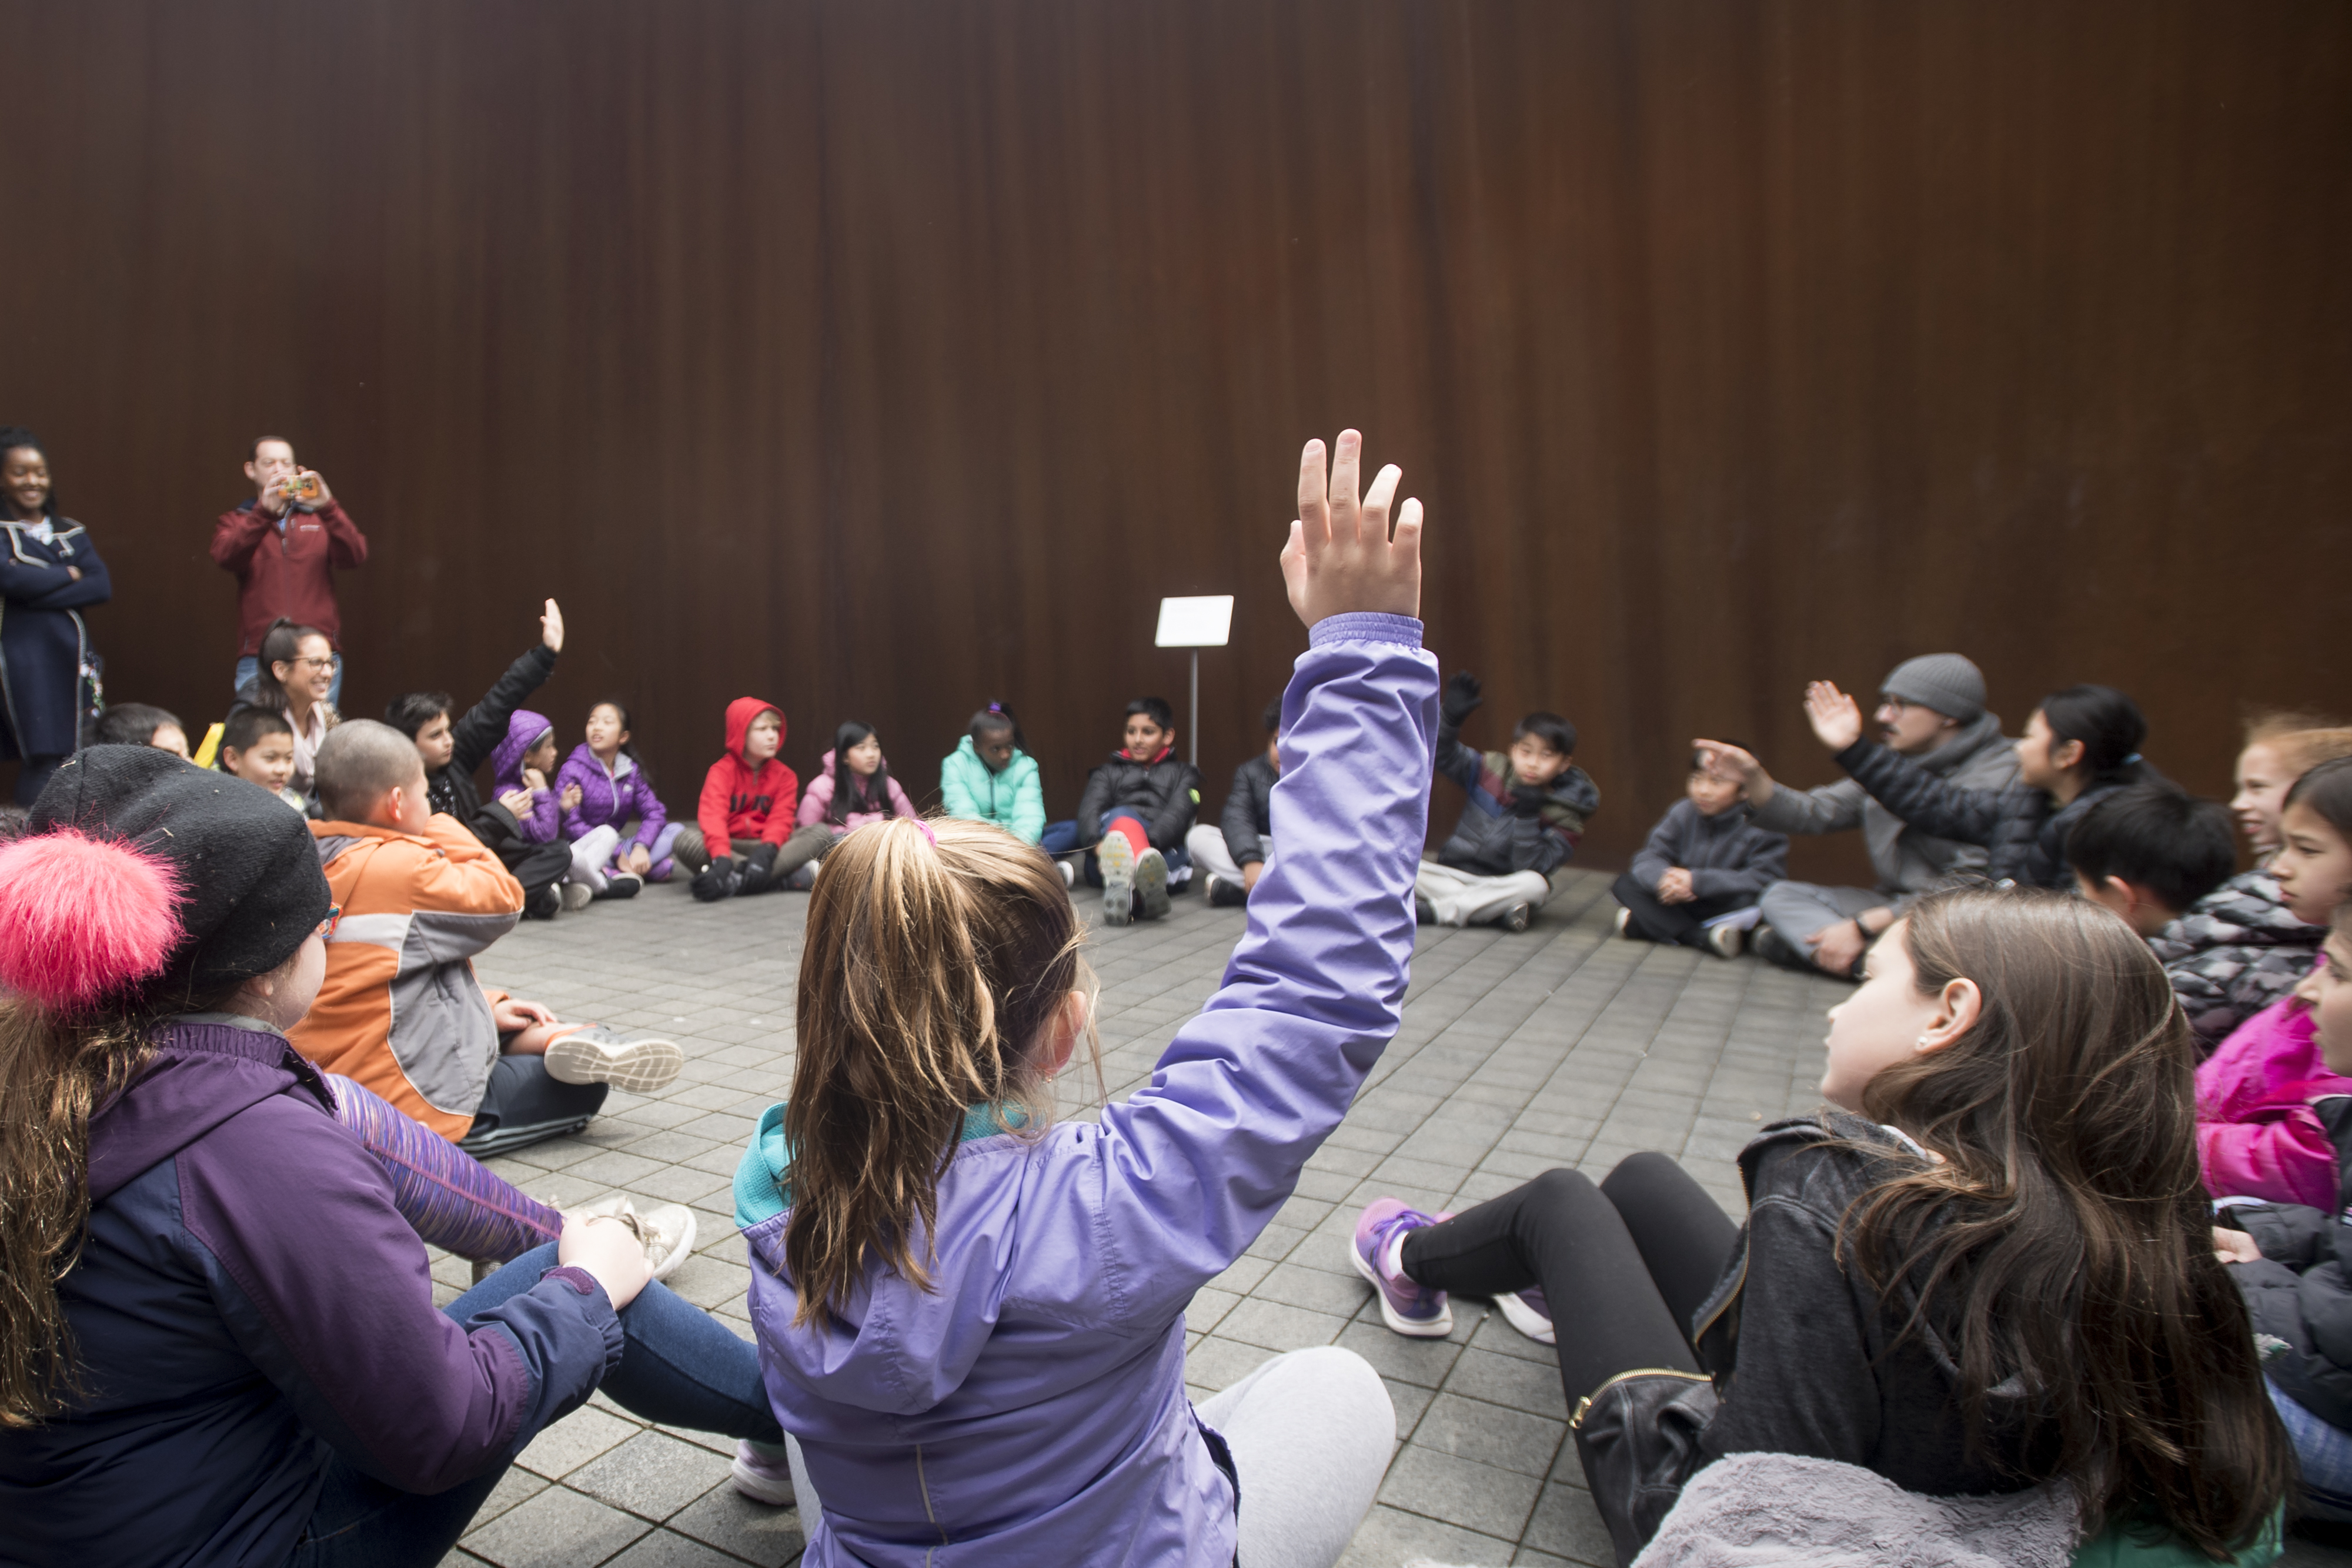 A partnership of Montgomery County Public Schools, Glenstone Museum and Strathmore, Think Big Café is a multidisciplinary, year-long experience for fourth-graders from different schools who go on field trips to Glenstone to study sculpture, then get together at AMP by Strathmore to process what they learned.